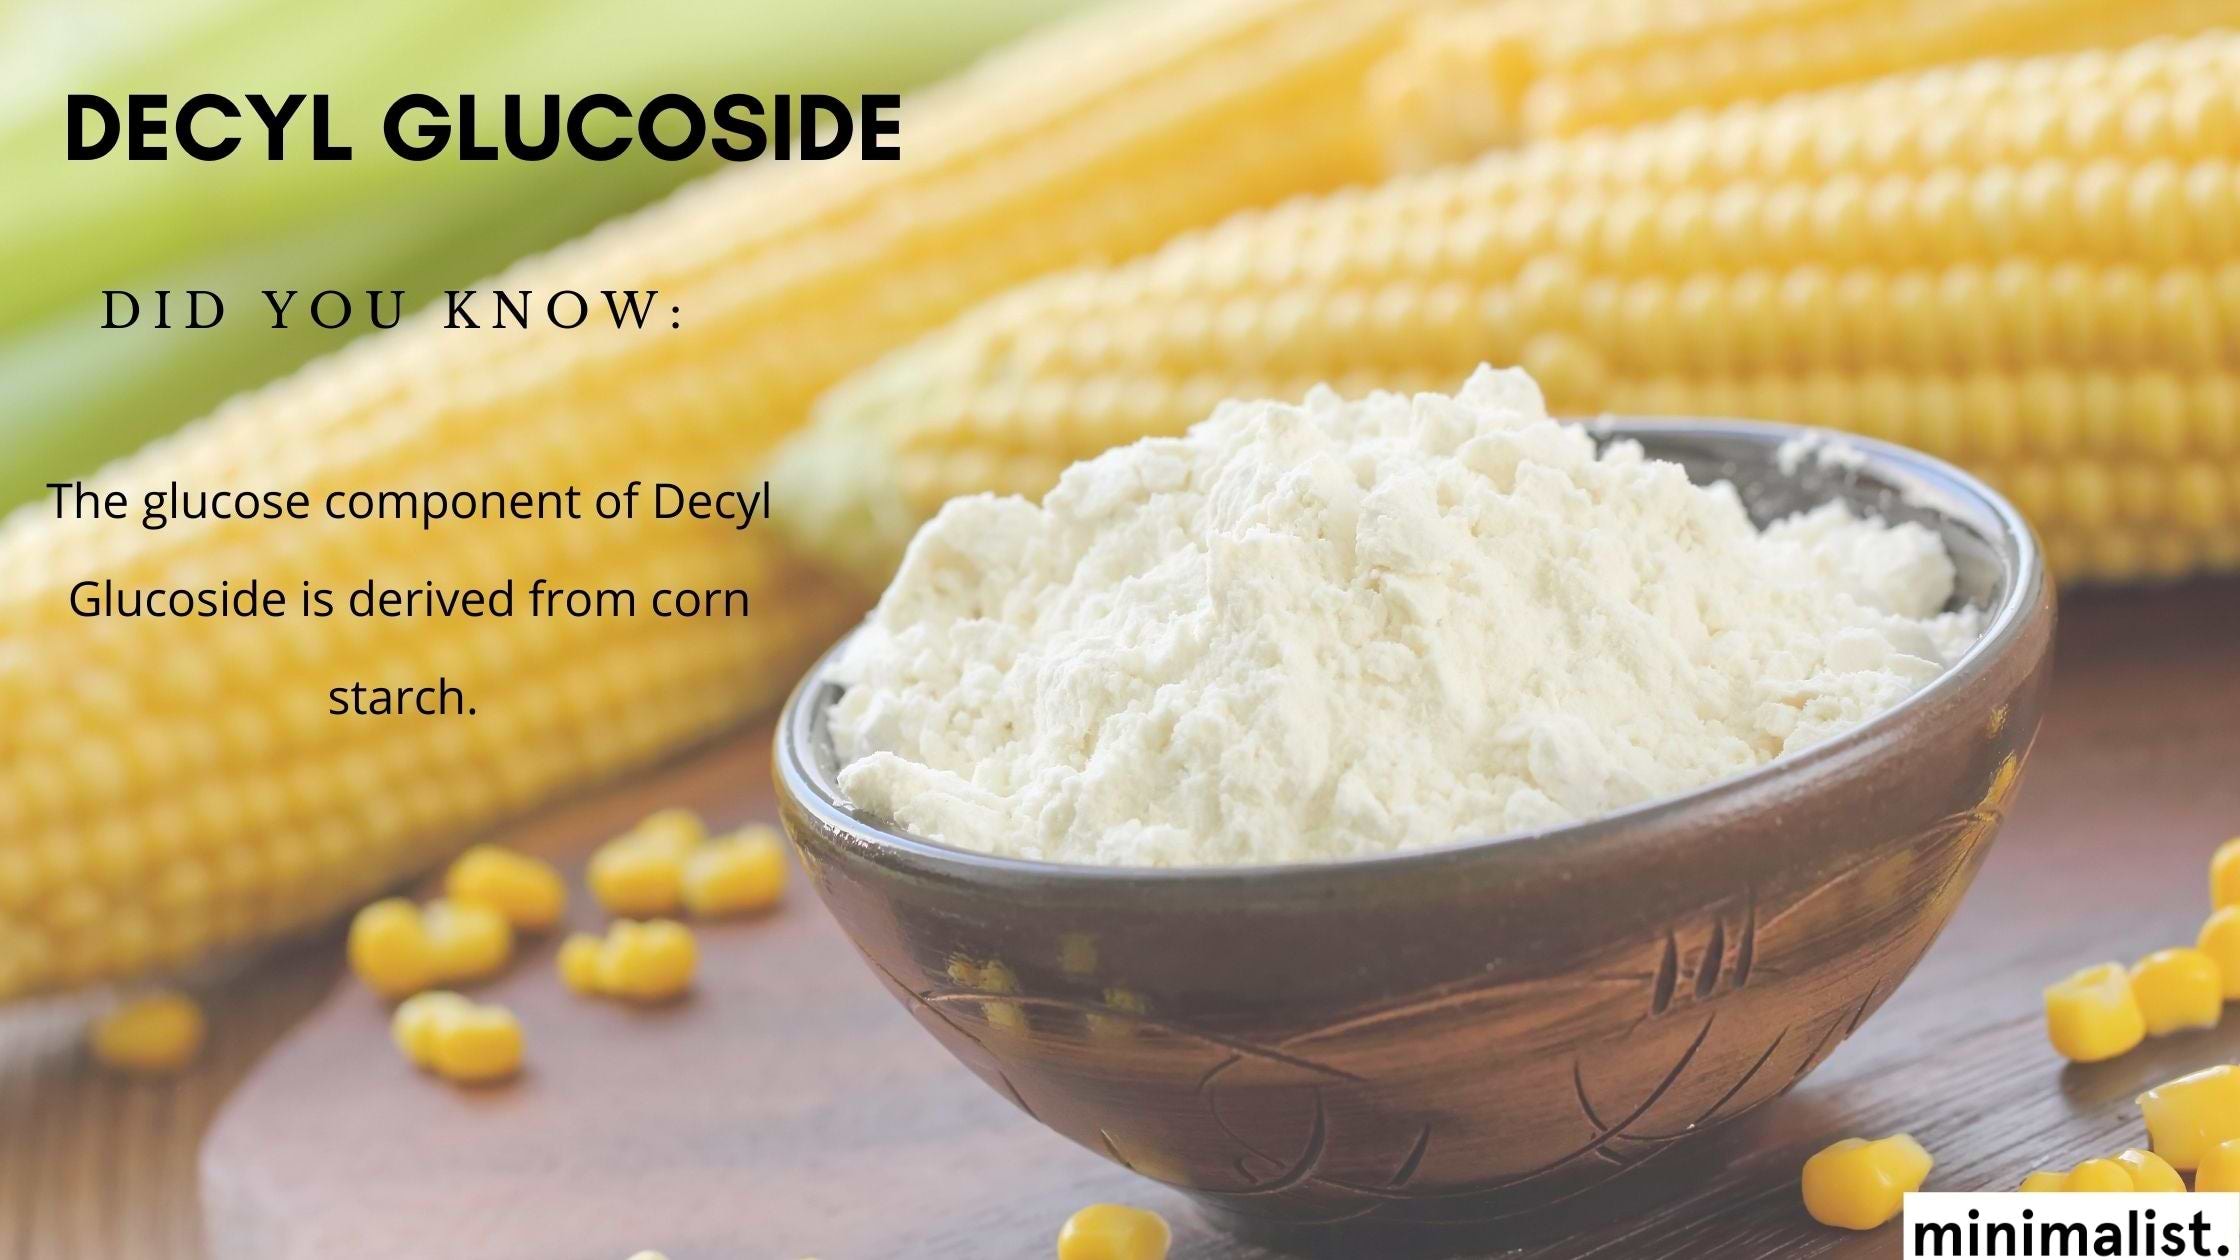 How is Decyl Glucoside obtained?